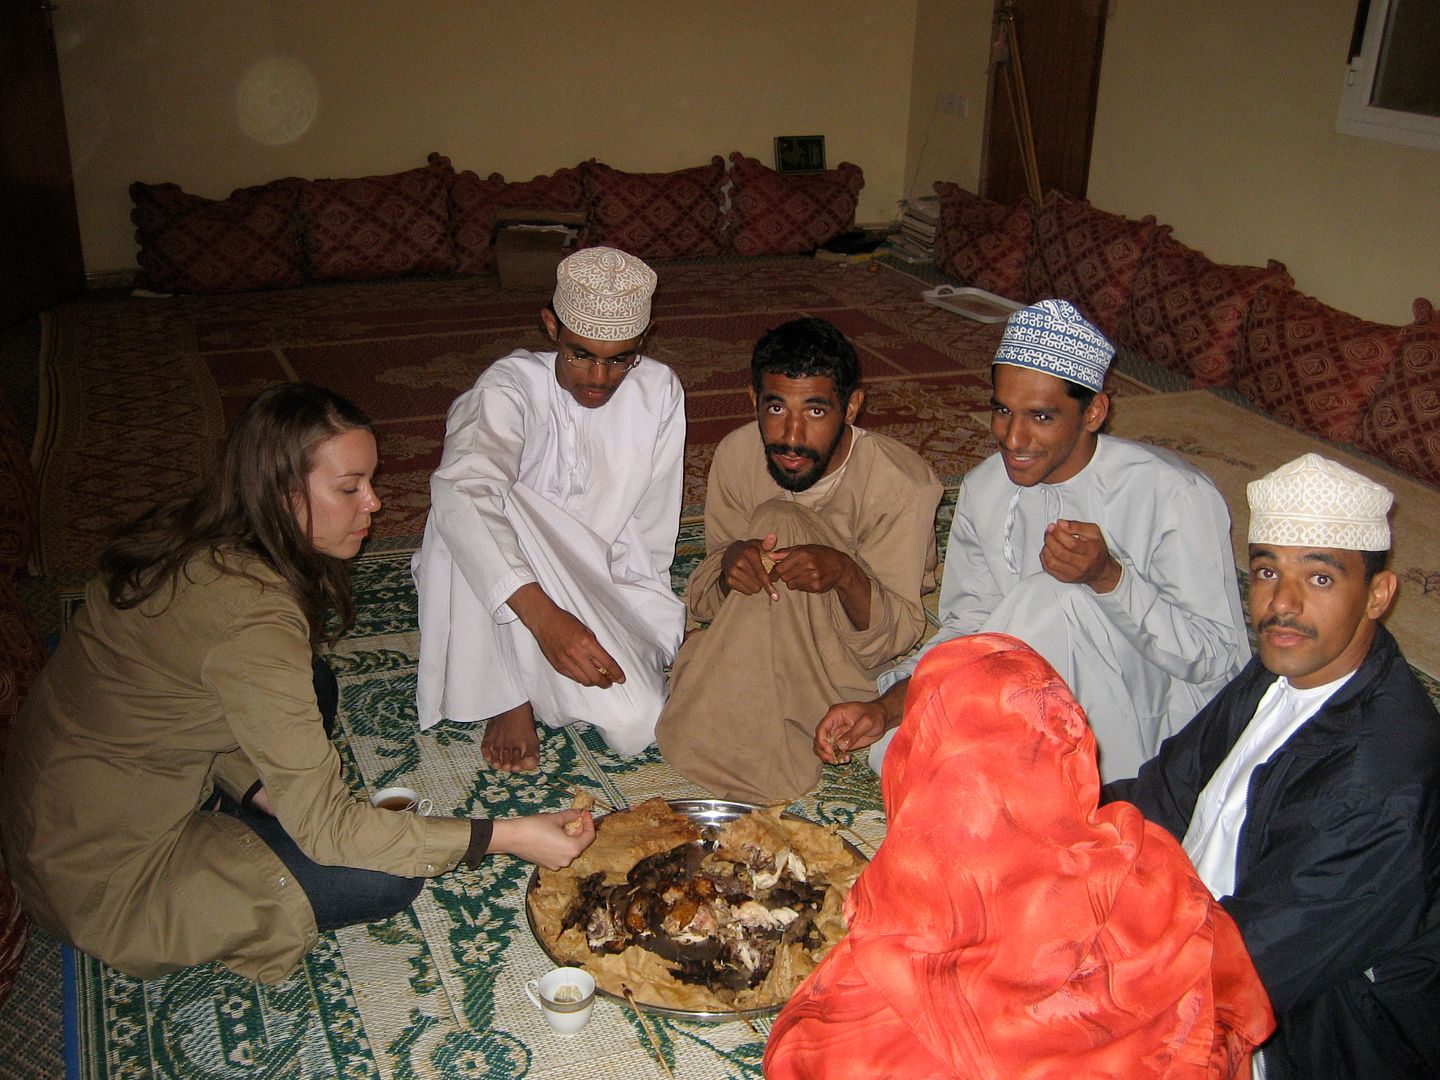 2012.01.03, Eating a traditional Omani meal of roasted lamb with a flat pancake like bread (Ibri, Oman)